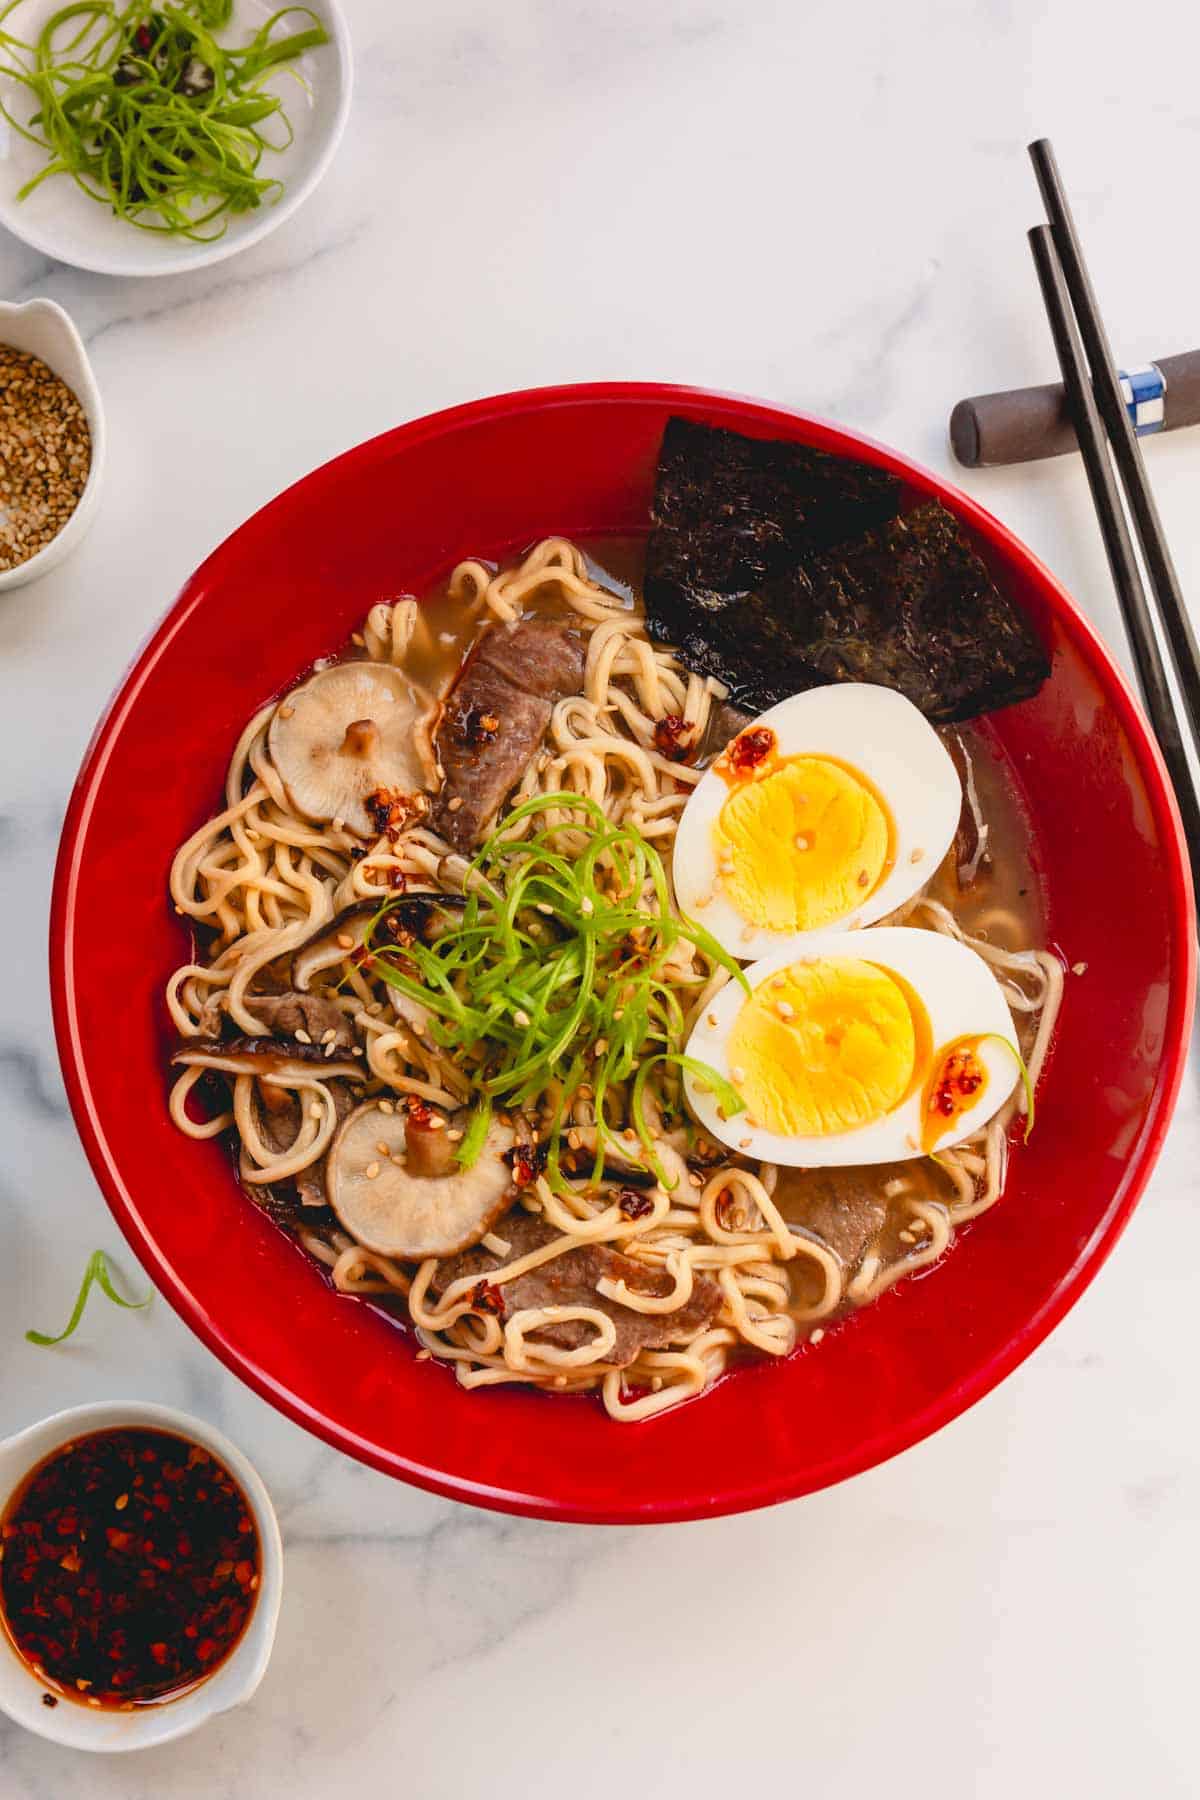 Overhead image of a bowl of ramen with eggs, nori sheets, and scallions.